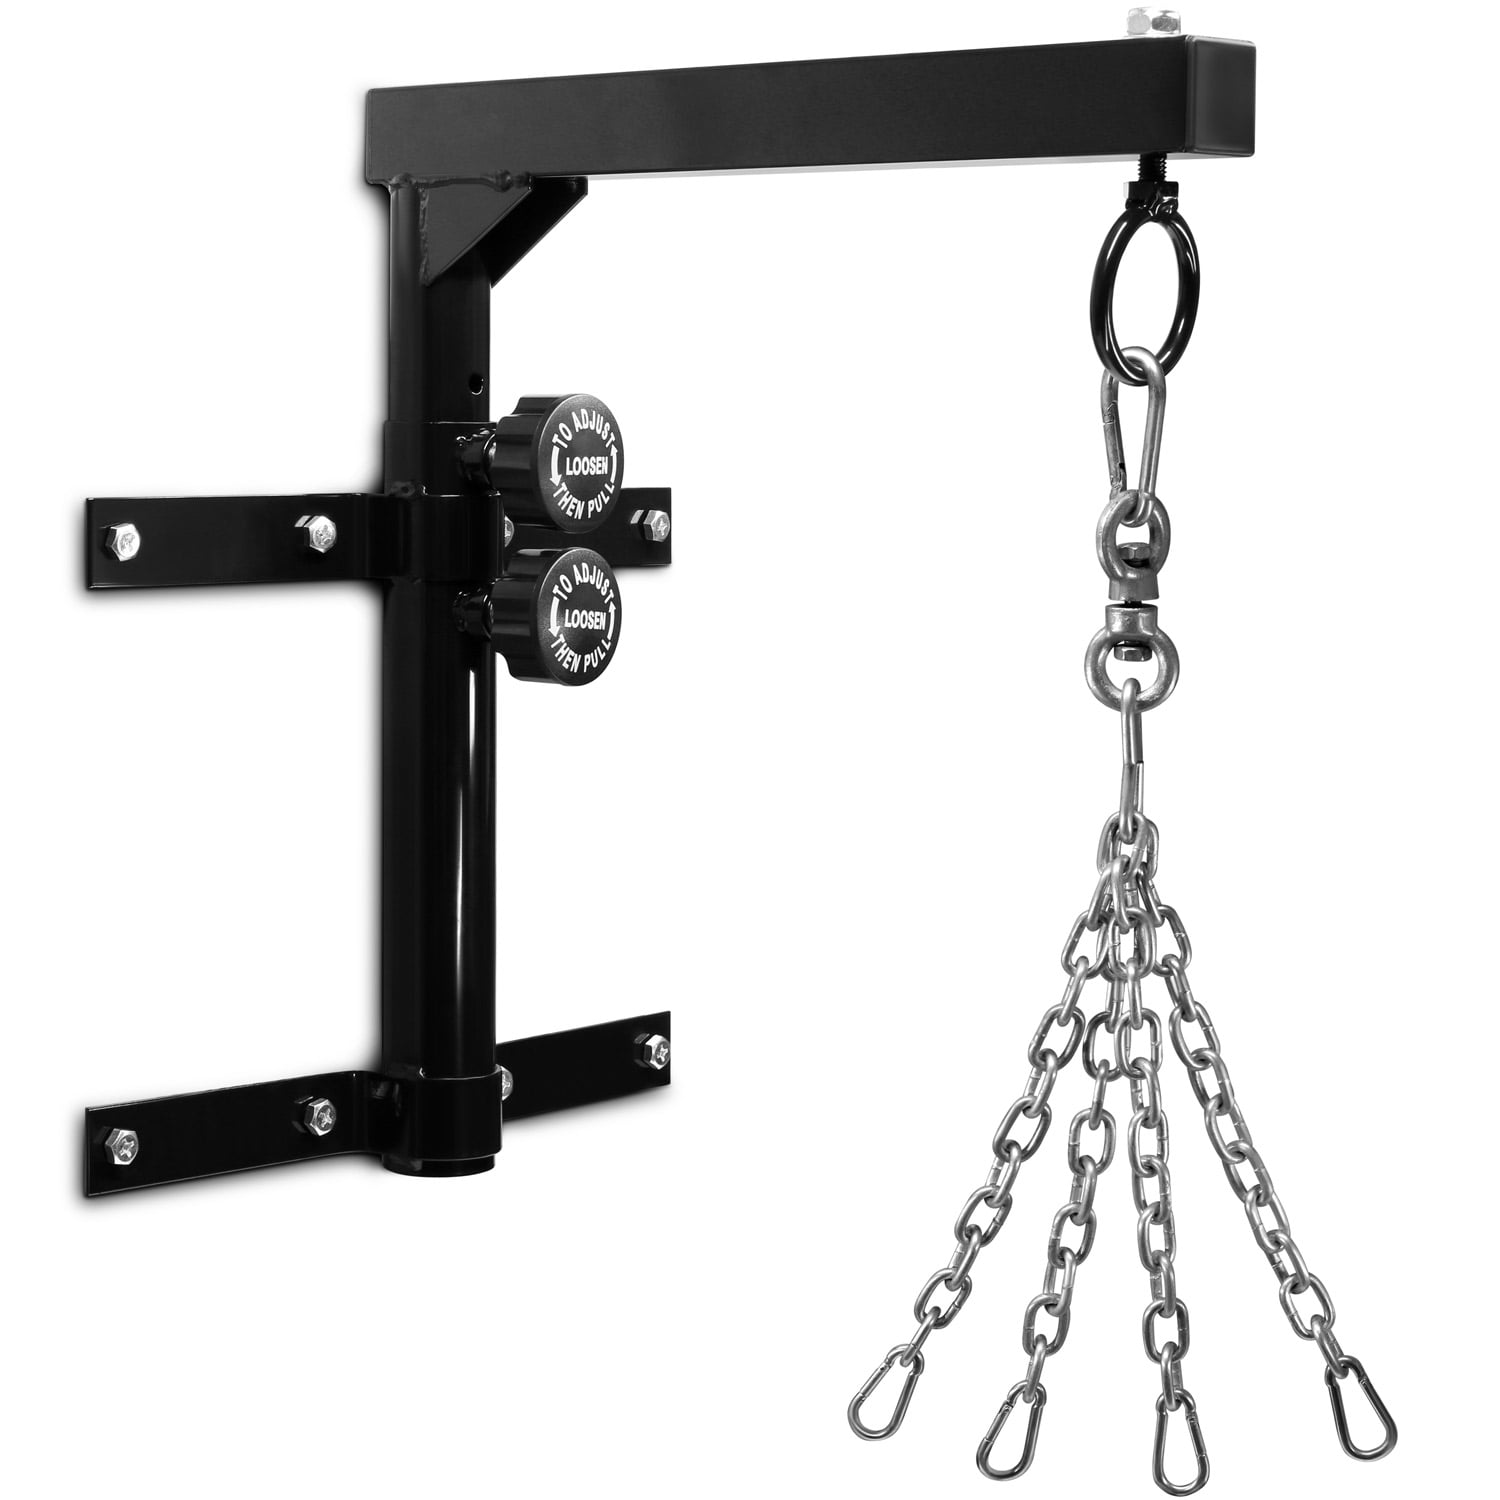 Details about   Kickboxing Boxing & MMA Heavy Duty Bag Hanger Punch Bag Wall Ceiling Mount Hook 